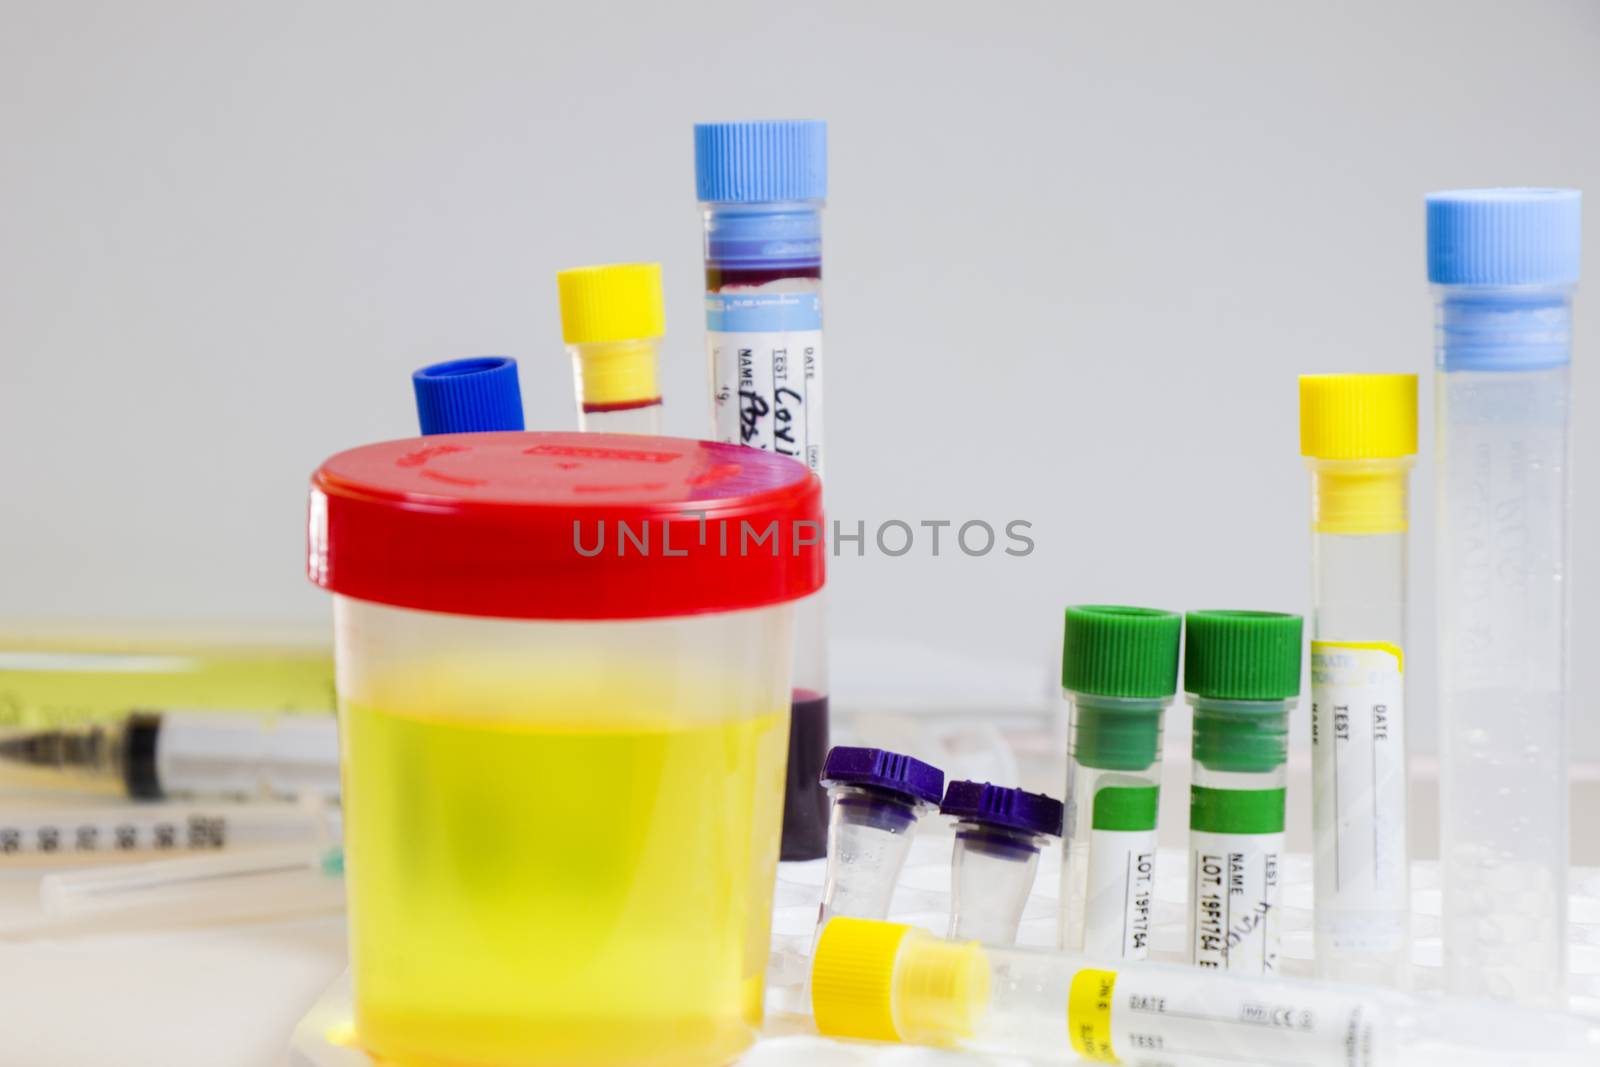 Drug test, medical urine and pee test with blood and other tubes on the white background, colorful lab test containers, viruses and doping laboratory tests. Covid 19, HIV, aids and other infections